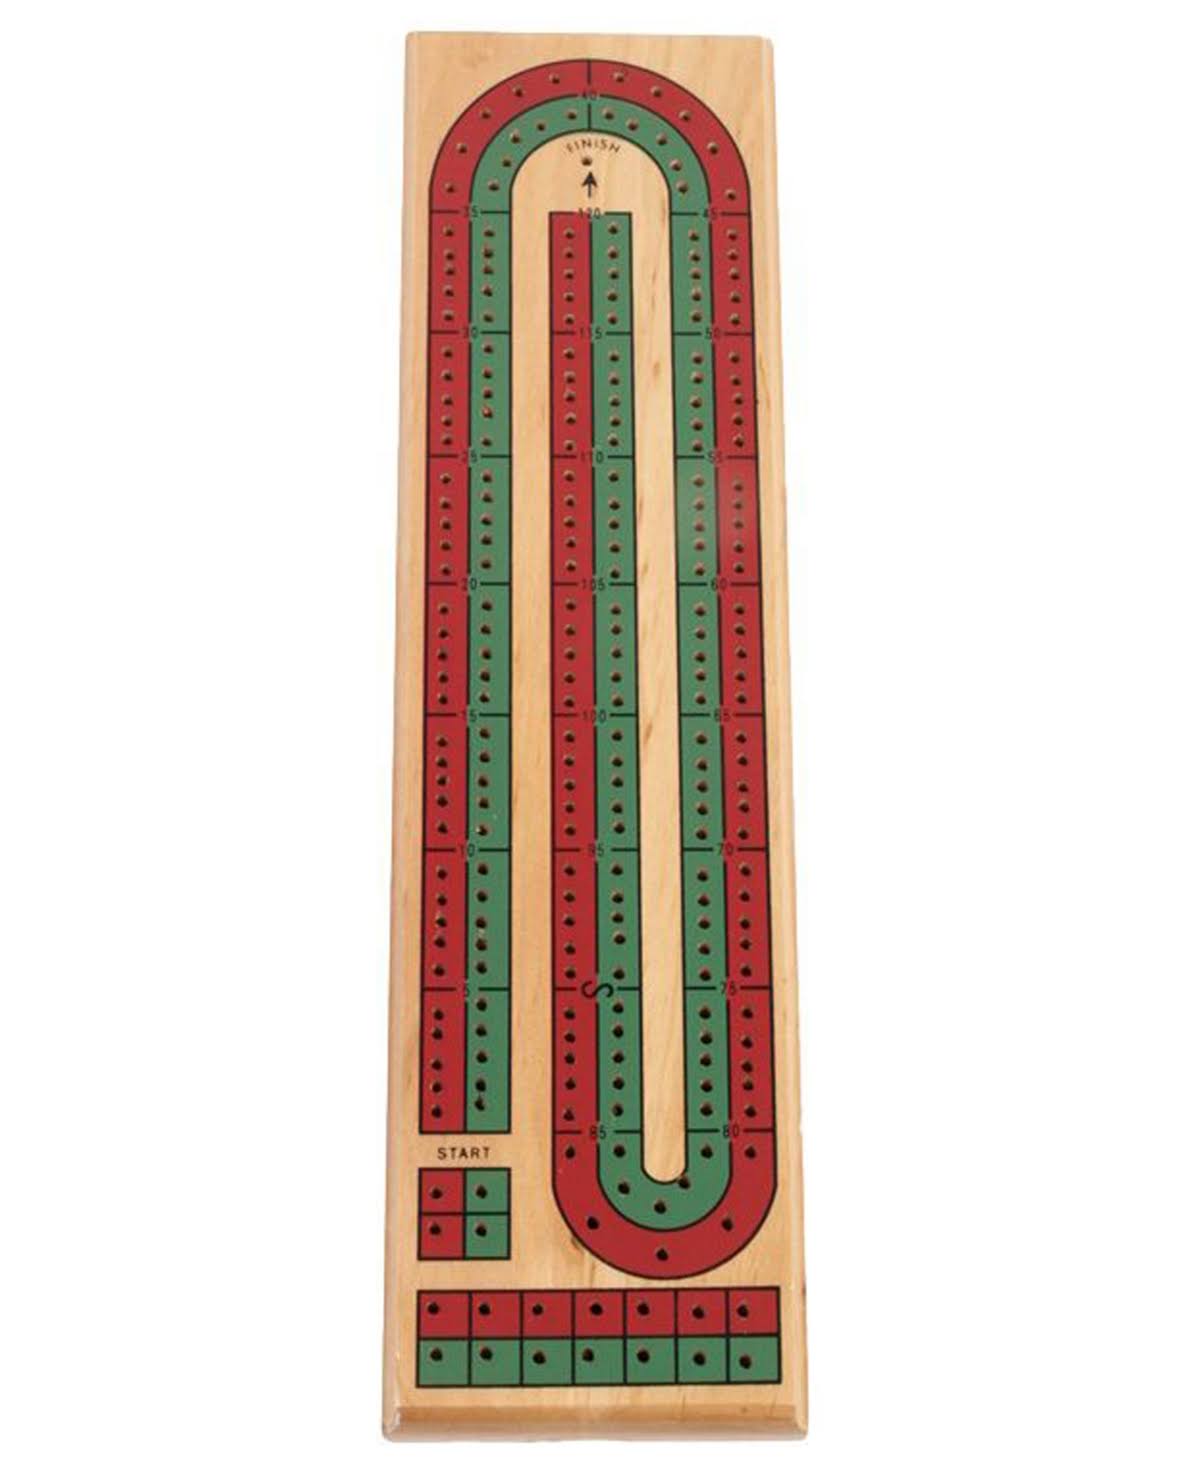 John N Hansen Co Classic Game Collection - 2 Track Color Cribbage